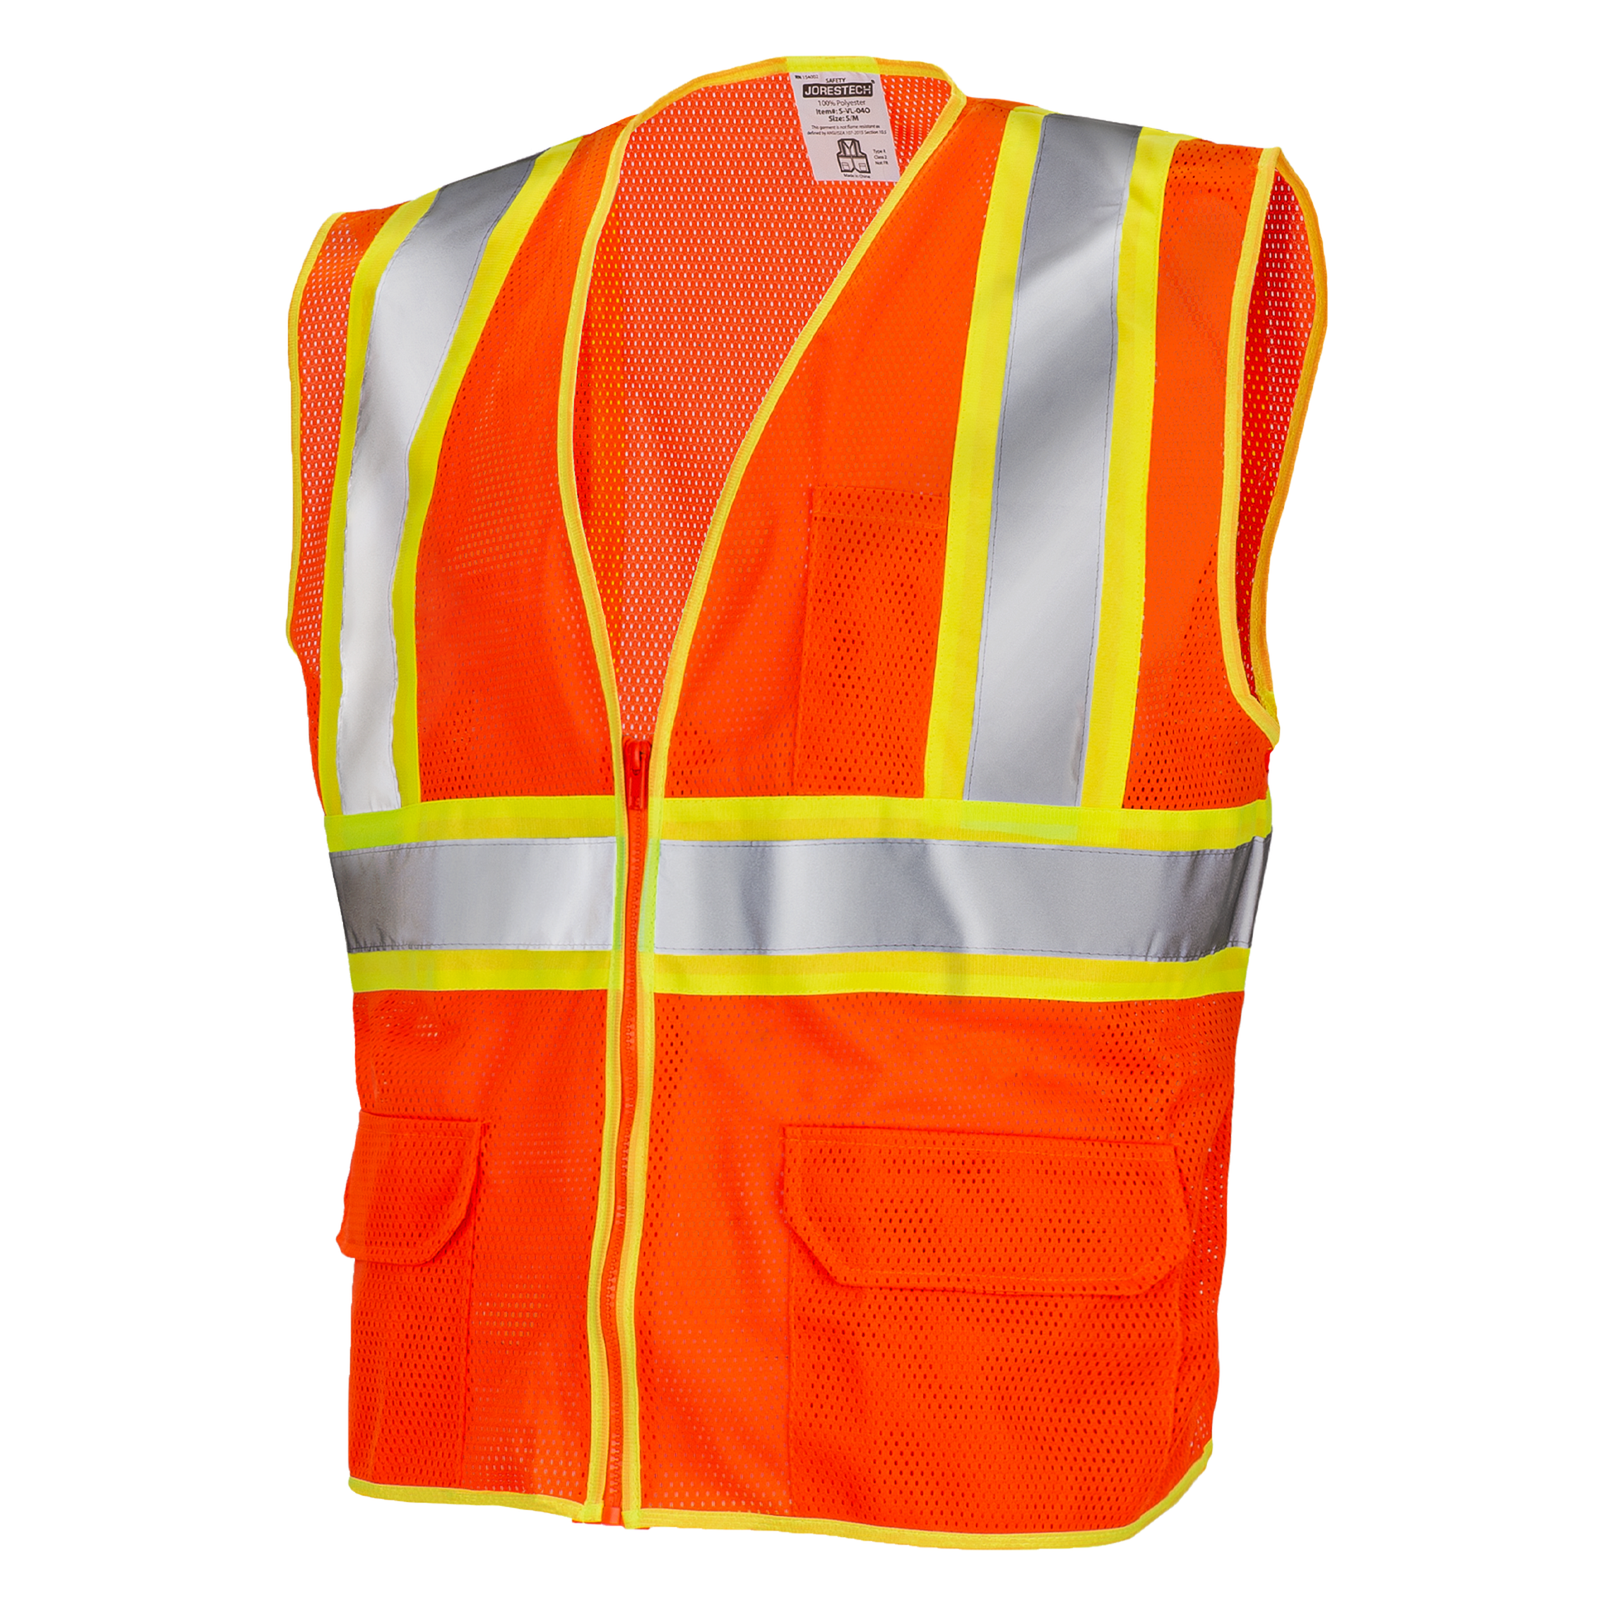 Class 2 High Reflective T/C Fabric Vest Tape Clothes Tape En471-2 ANSI107  Reflective Tape